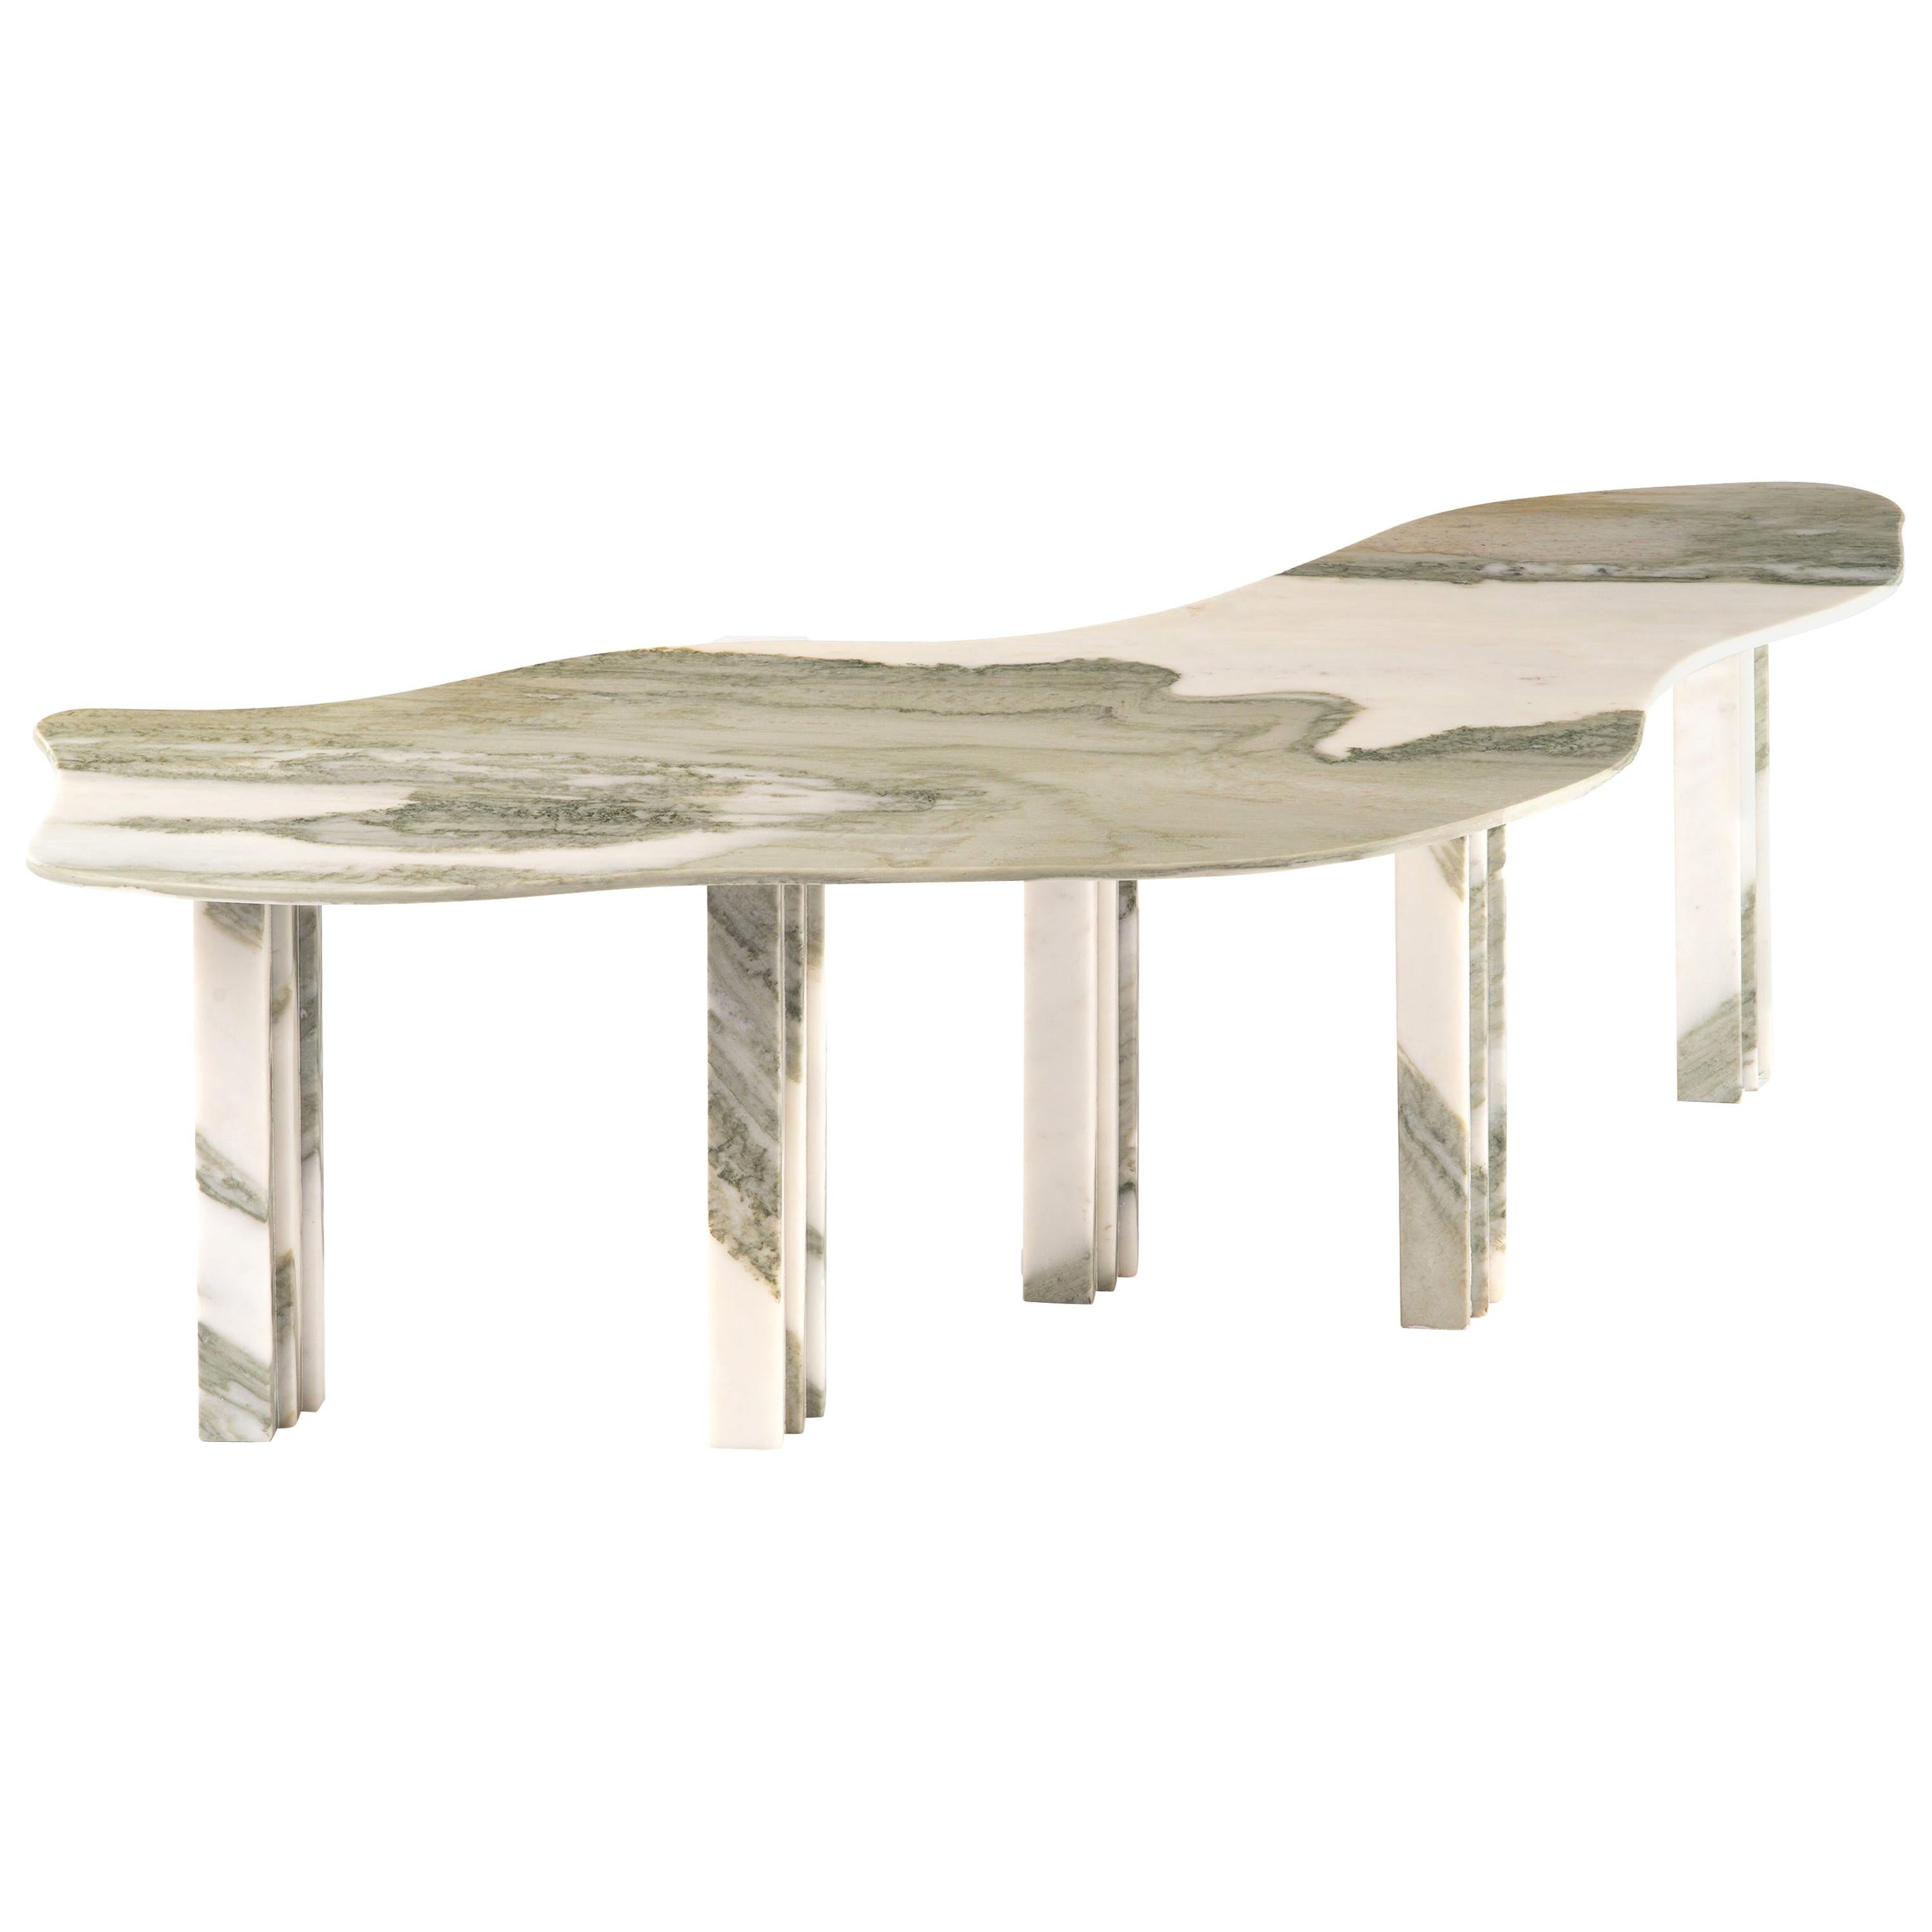 Bicolor sculptural marble coffee table signed by Lorenzo Bini
Measures: 125 x 50 x H 37 cm
Materials: Calacatta.




SIX TABLEAUX is a series of marble tables designed by Lorenzo Bini and built by ATZARA MARMI with the support of